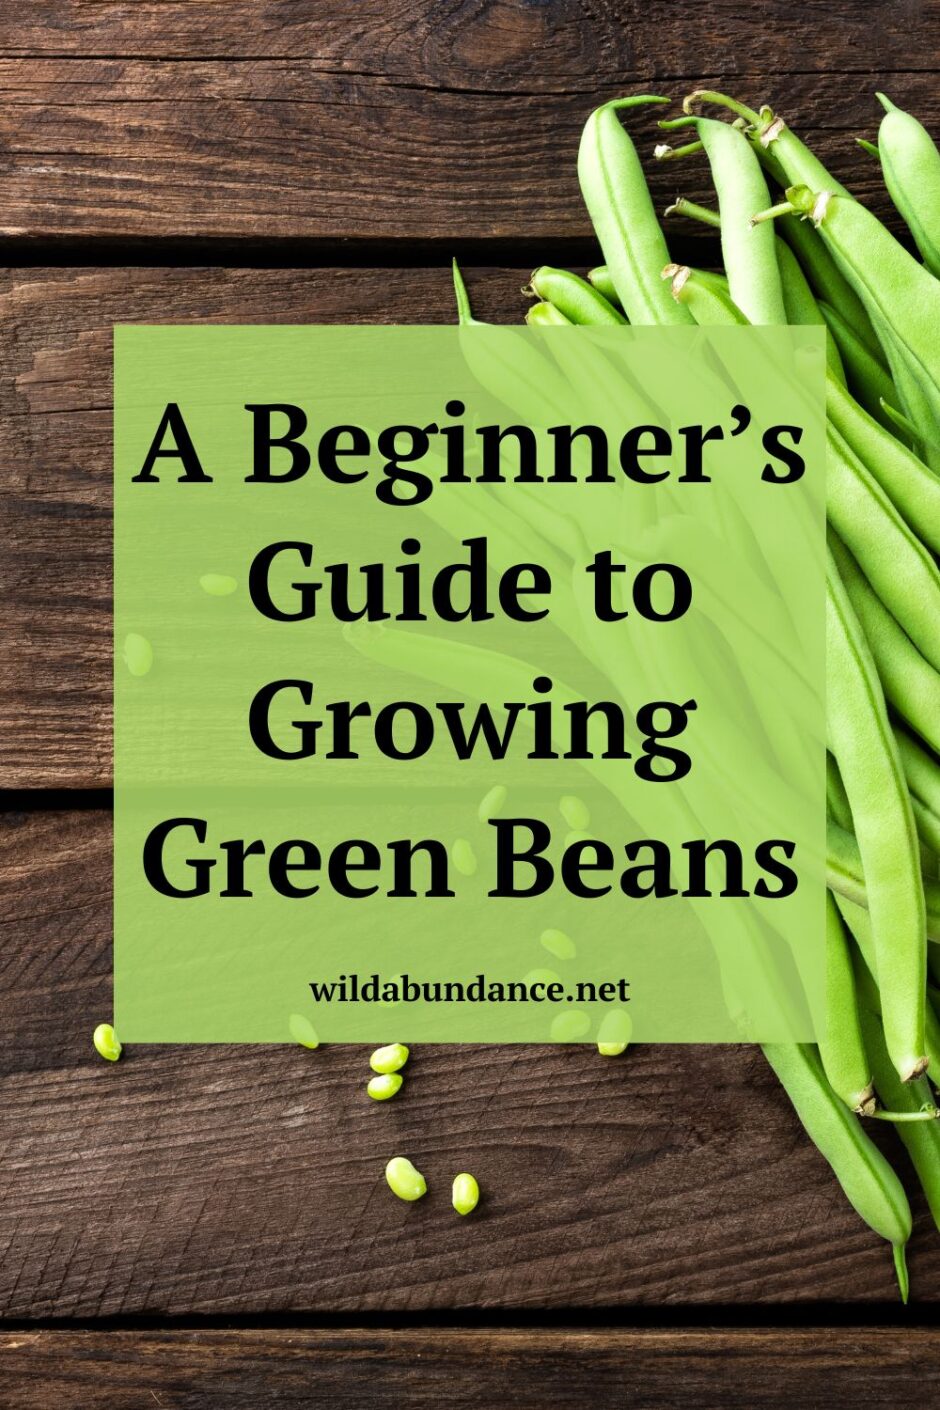 Text reads: A Beginner’s Guide to Growing Green Beans, photo behind is of green beans laying on a table